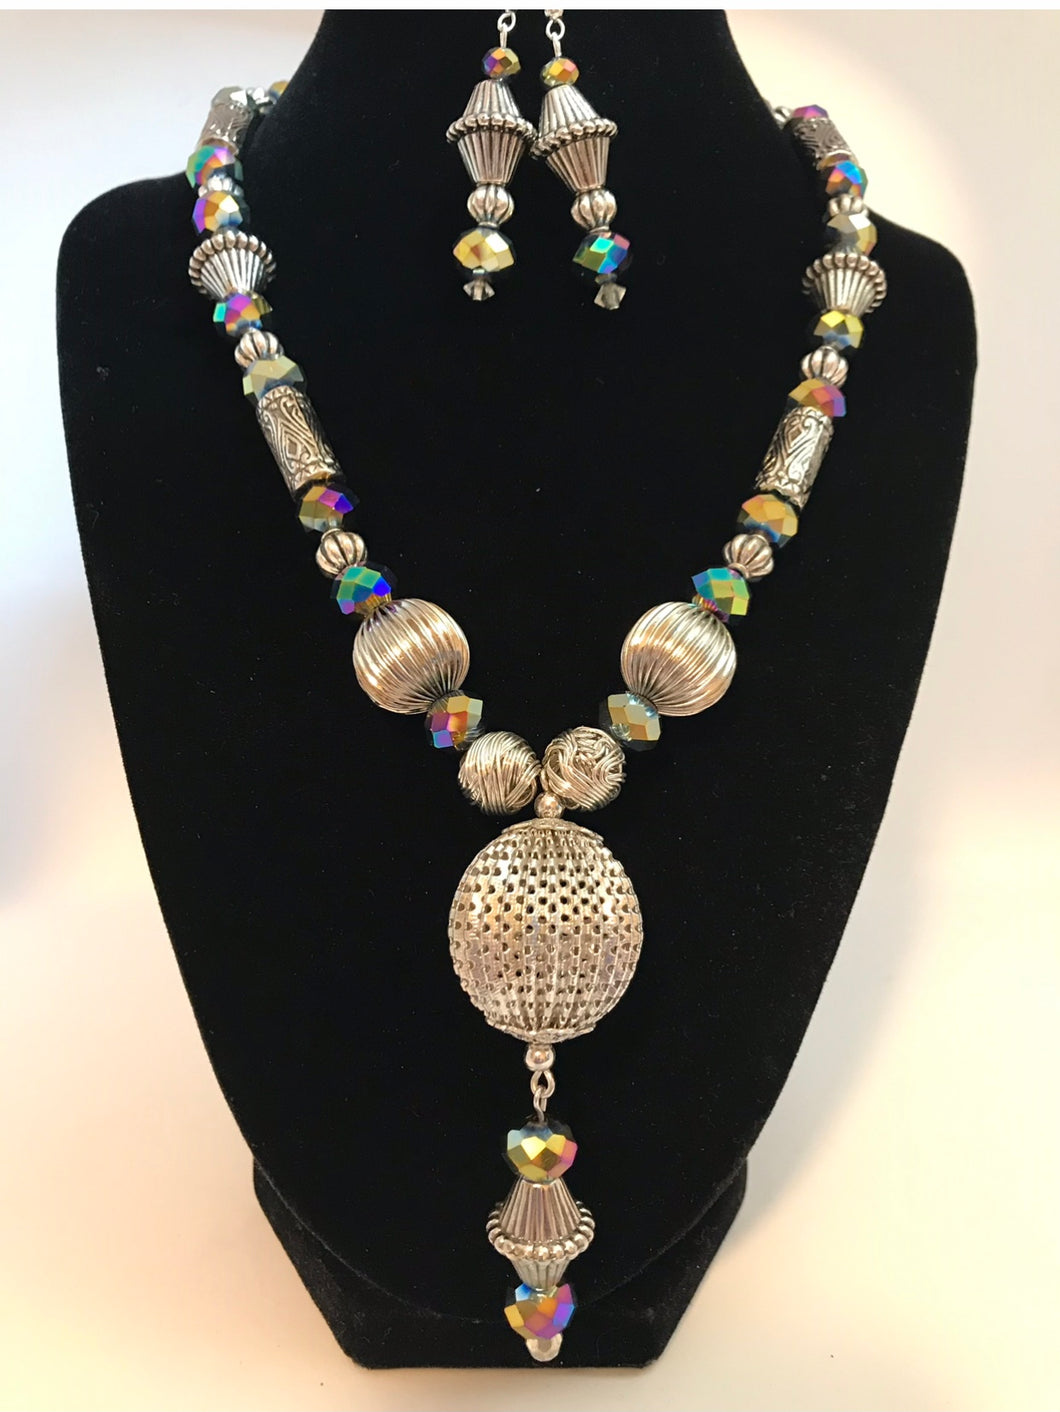 Large metal silver focal piece with assorted novelty metal beads and multi-color irridesent glass faceted beads, with matching earrings.